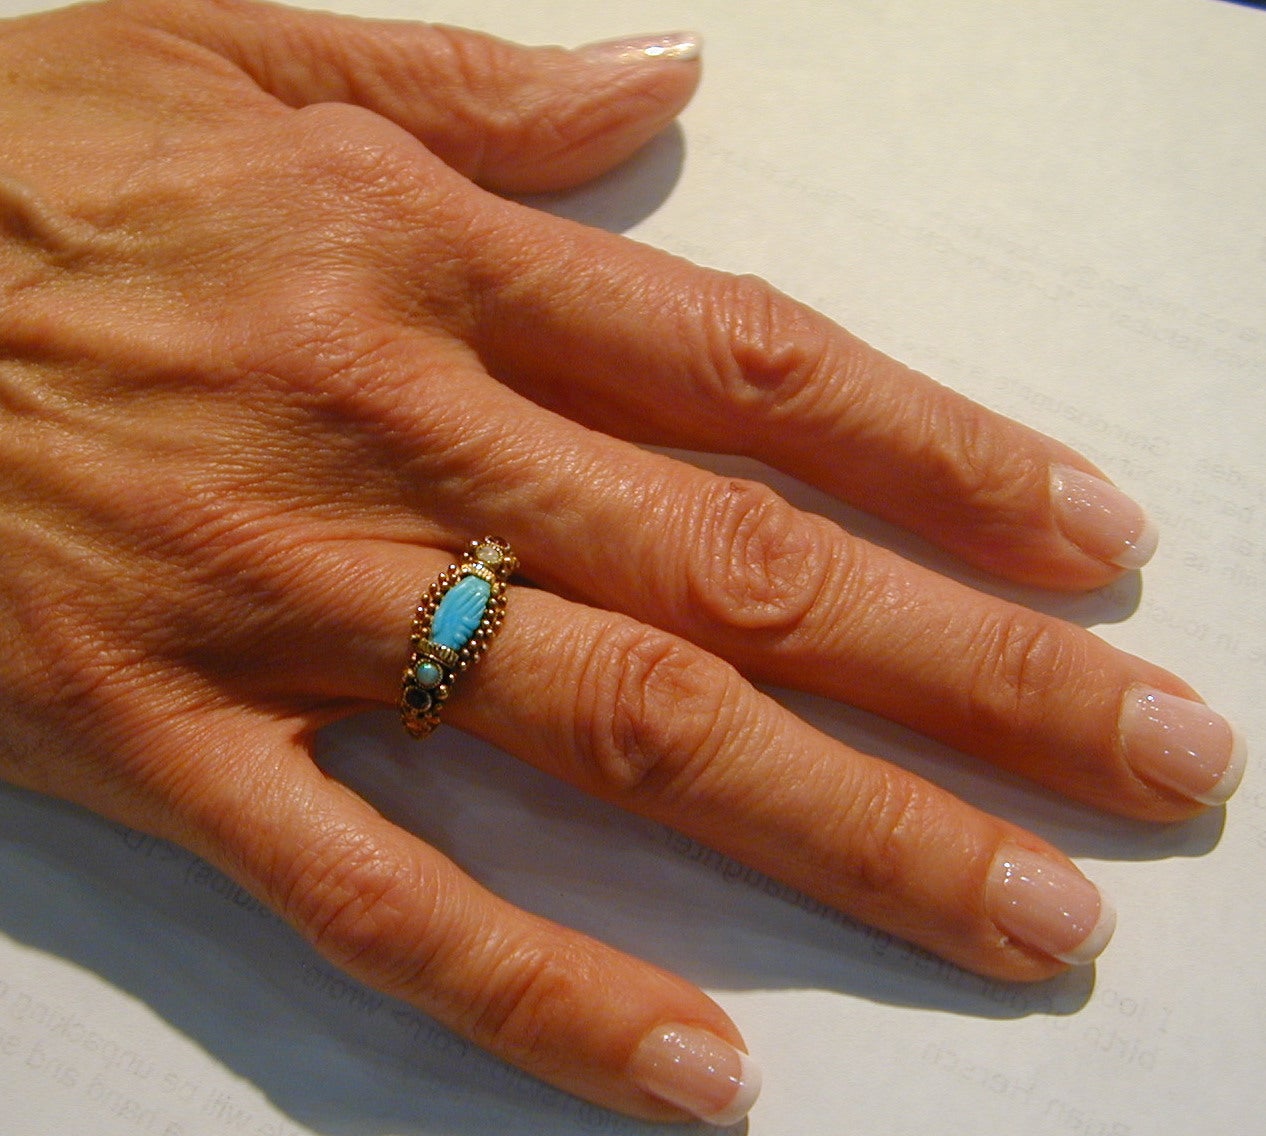 Antique Turquoise Clasped Hands Friendship Ring 3